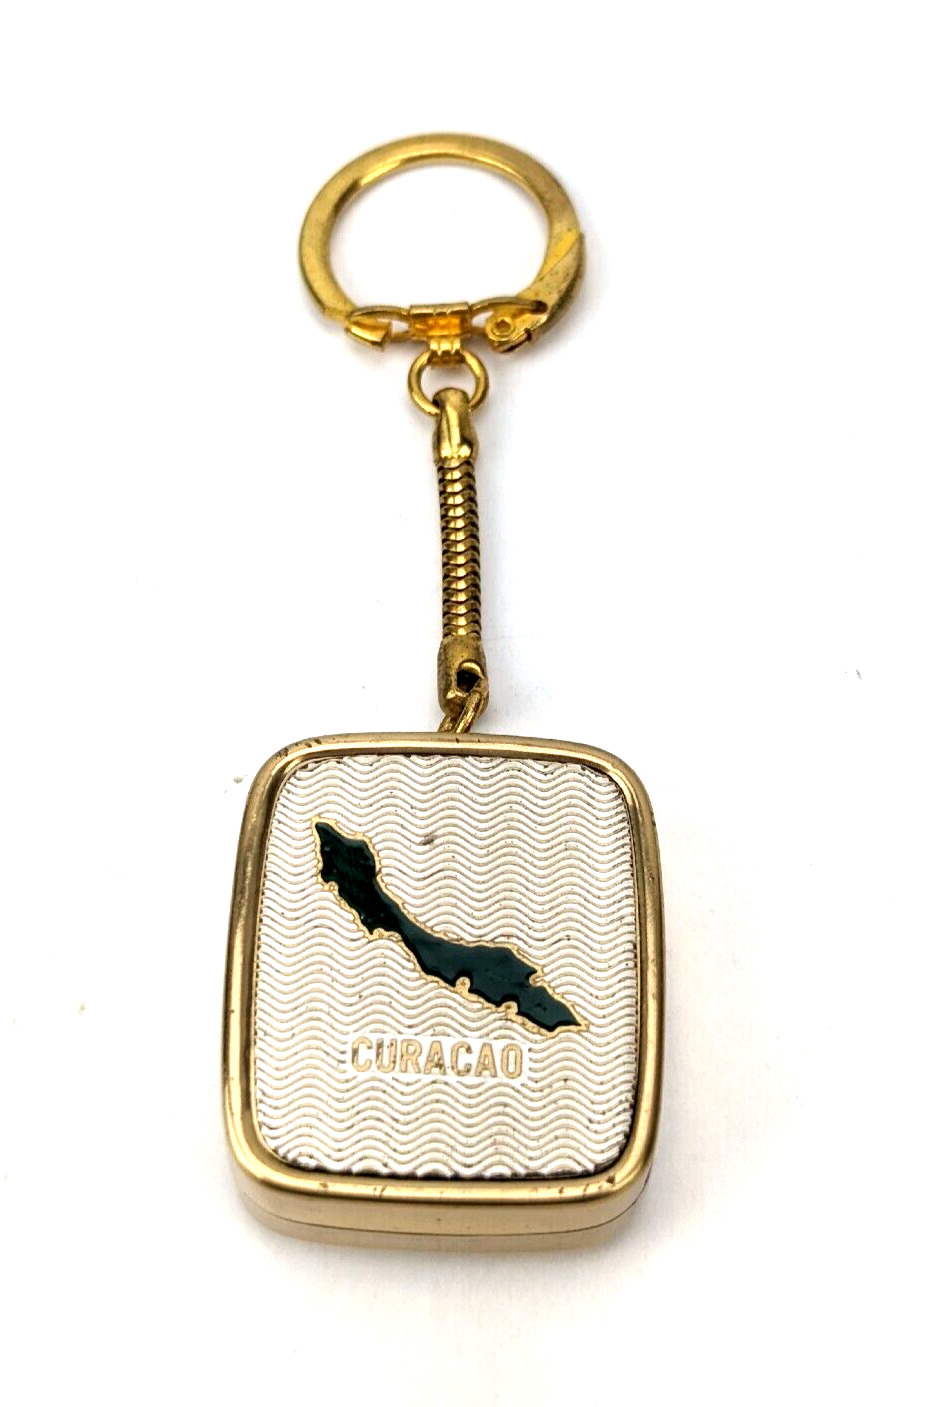 Vintage Sankyo Music Box Key Chain Fob Ring Gold Tone Curacao Works Great #C2